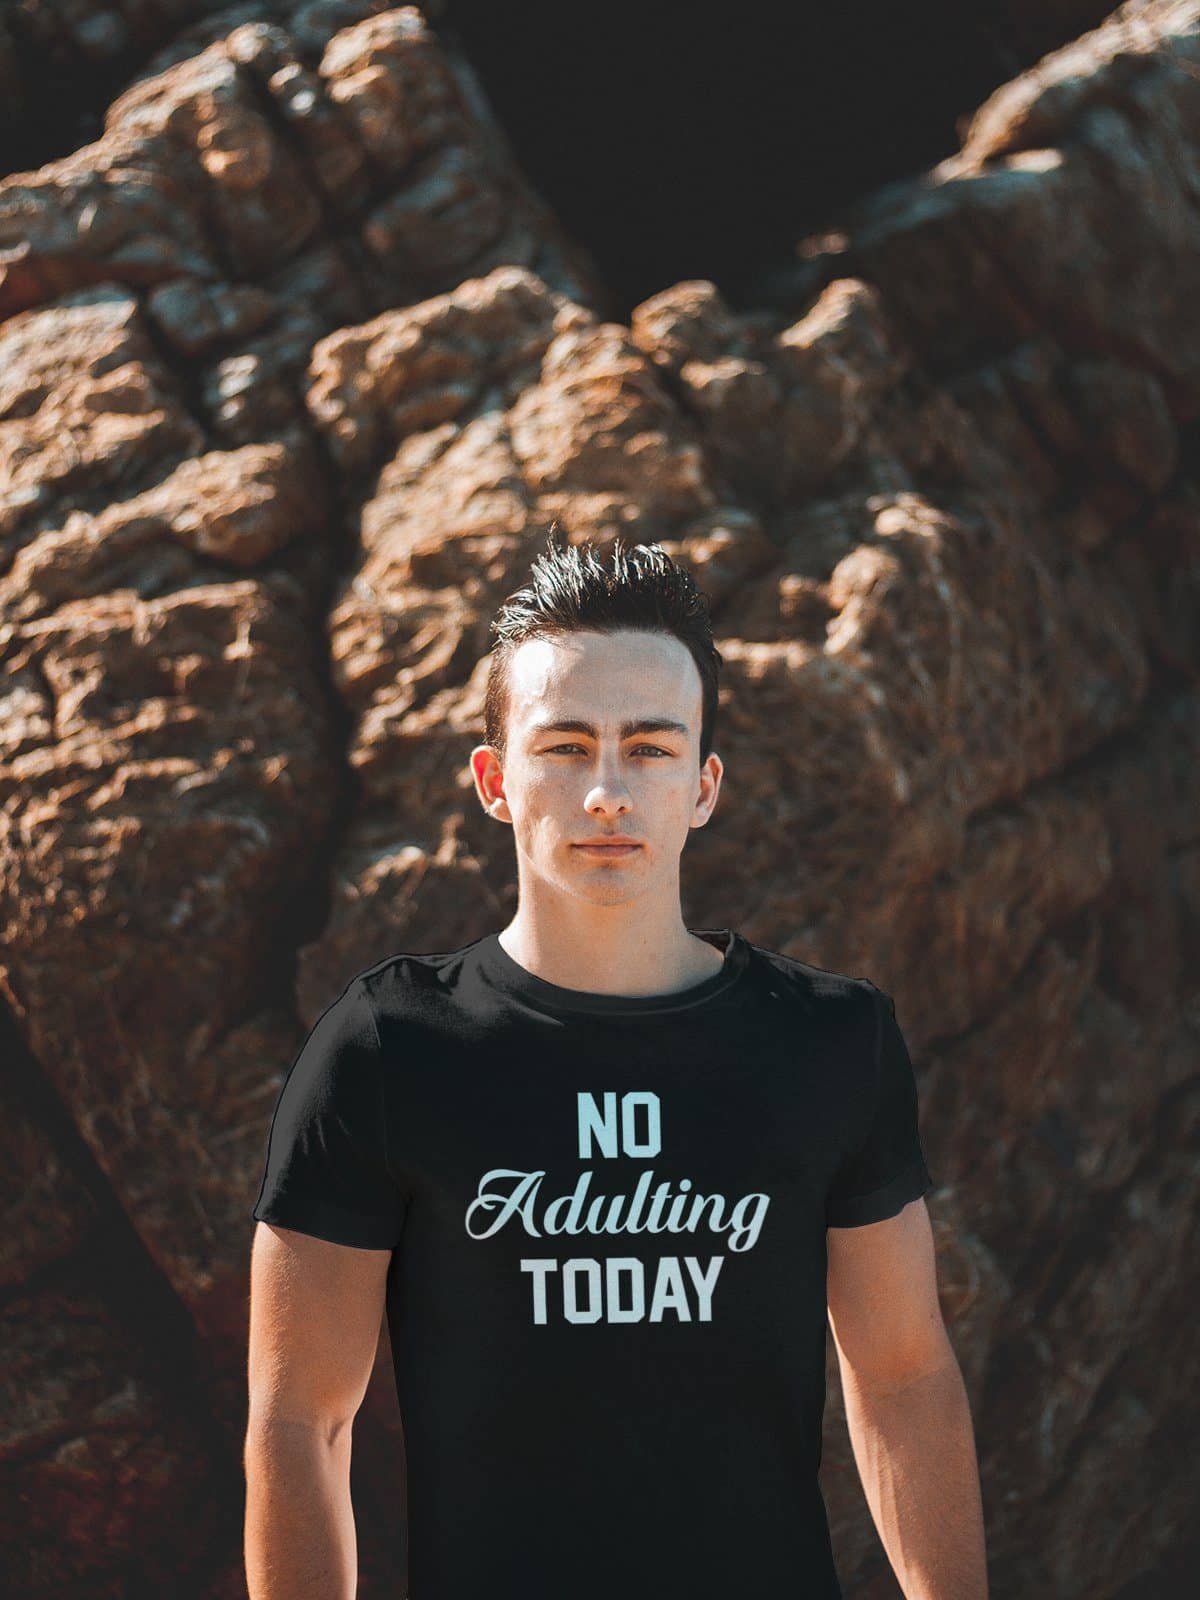 No Adulting Today Funny Black T Shirt for Men and Women - Catch My Drift India Clothing black, clothing, female, funny, general, made in india, parents, shirt, t shirt, trending, tshirt